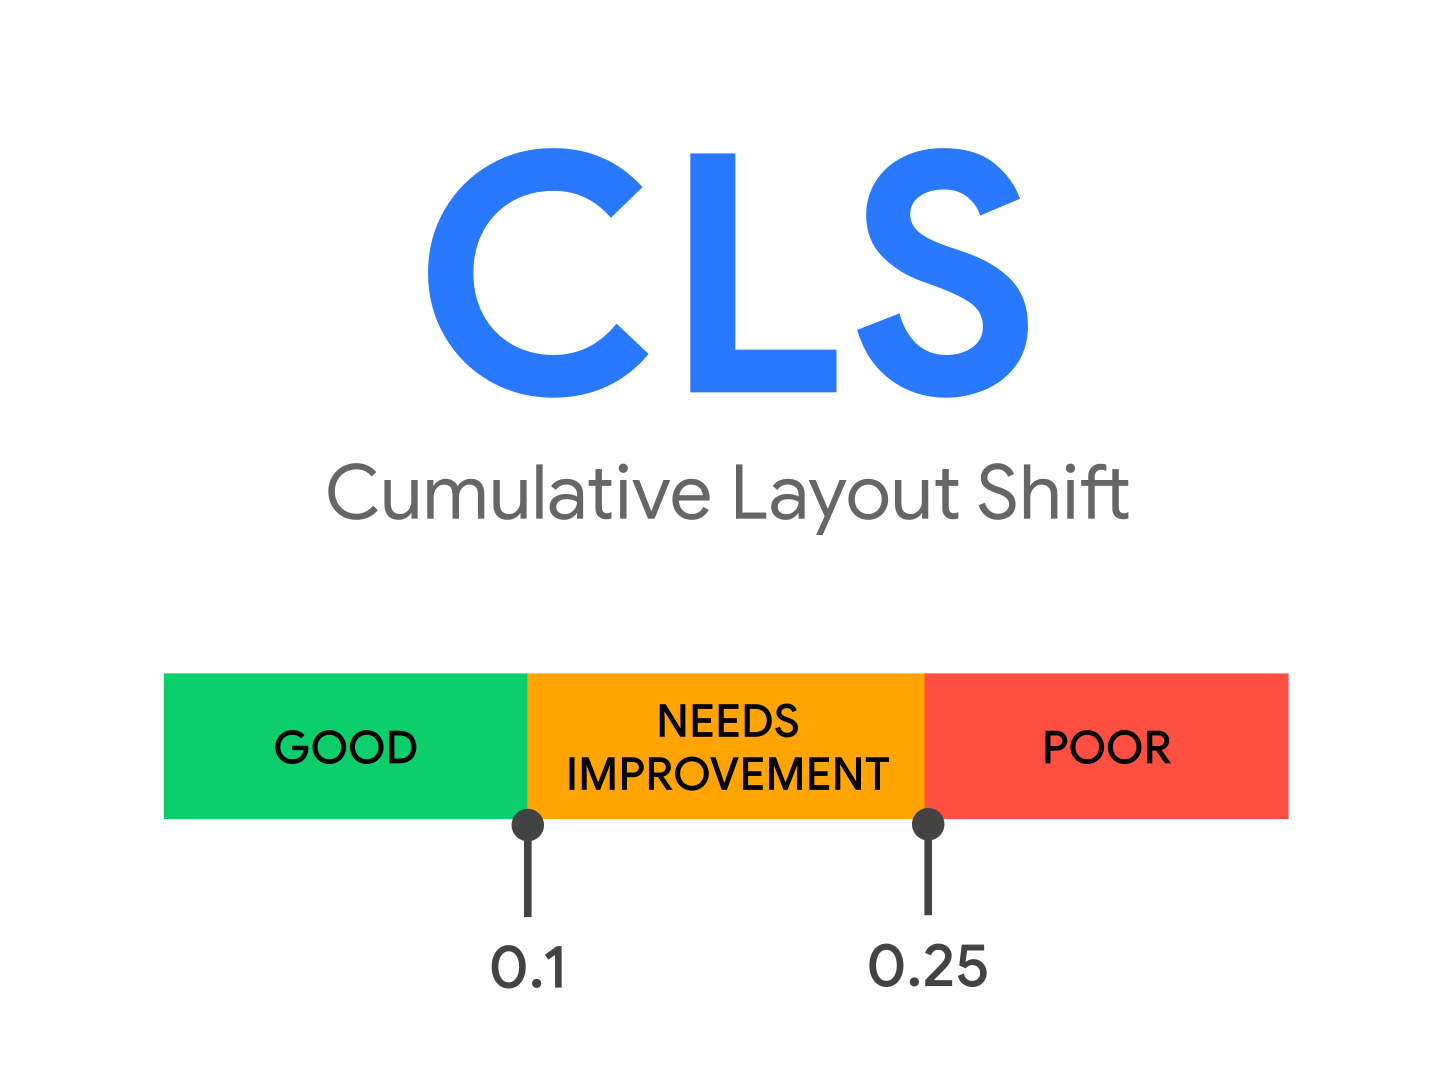 Good CLS values are 0.1 or less, poor values are greater than 0.25, and anything in between needs improvement